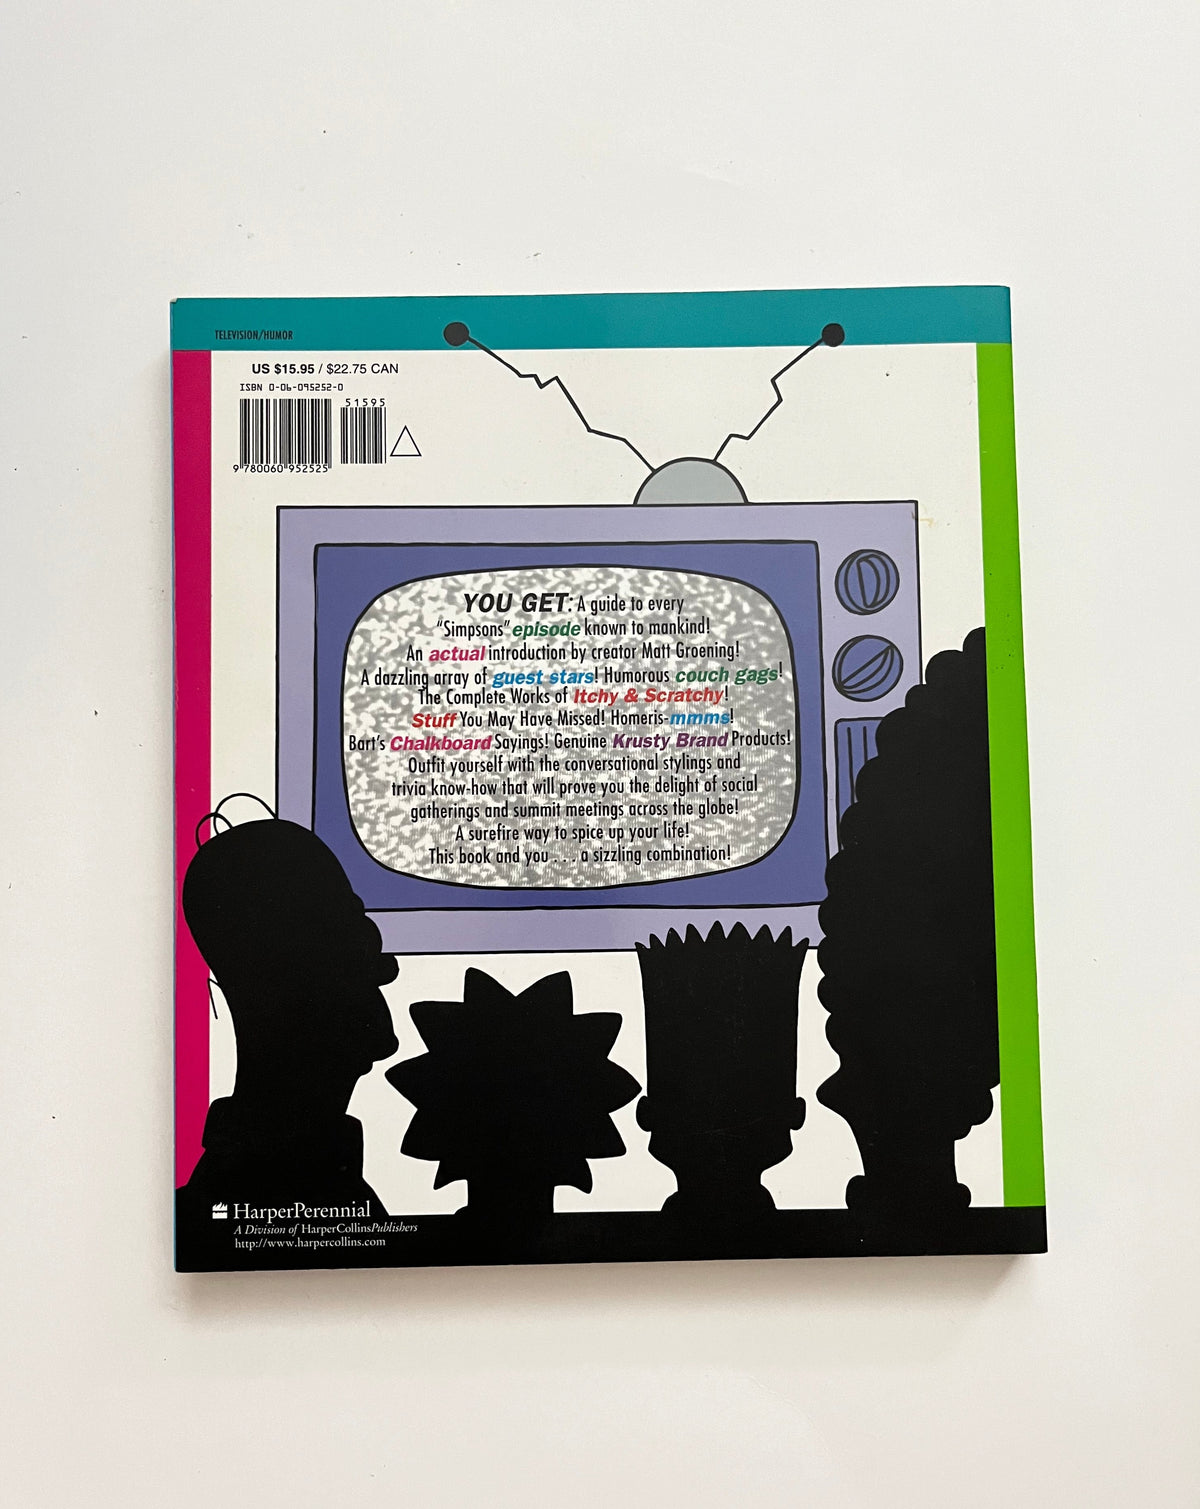 The Simpsons: A Complete Guide to Our Favorite Family by Matt Groening and Ray Richmond